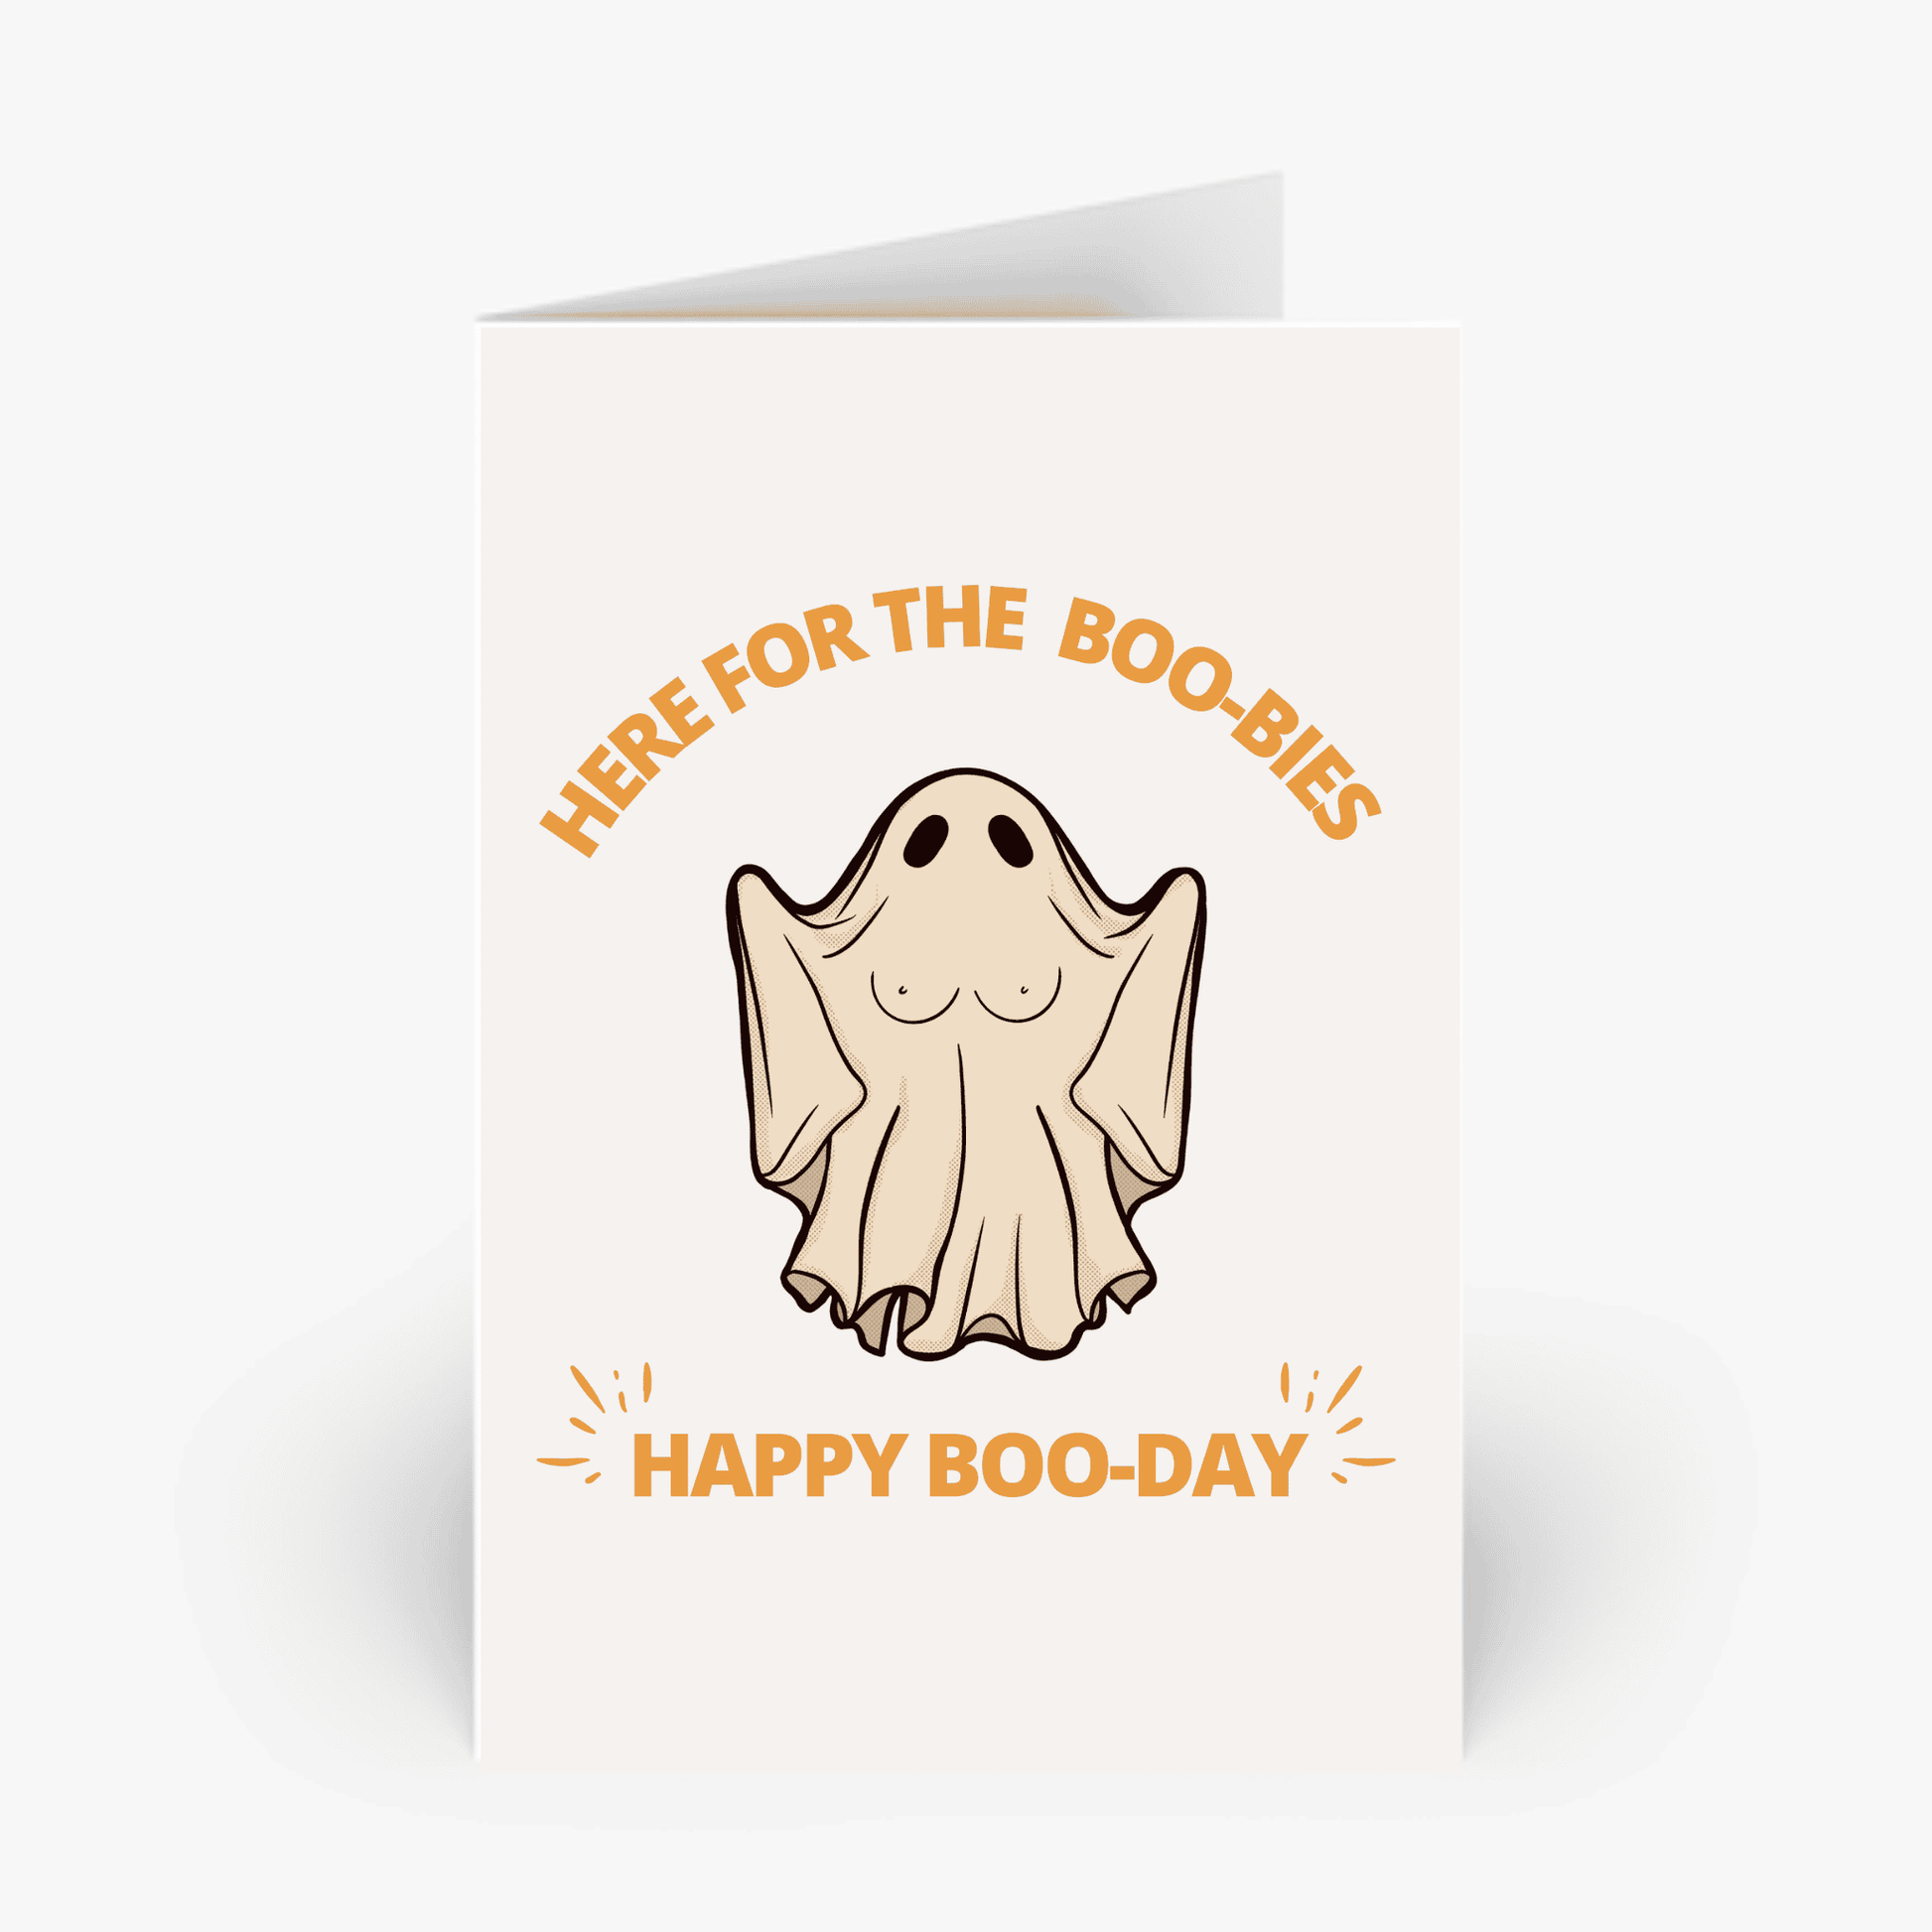 I Body Love Gift Card Here For The Boo-bies Halloween Card